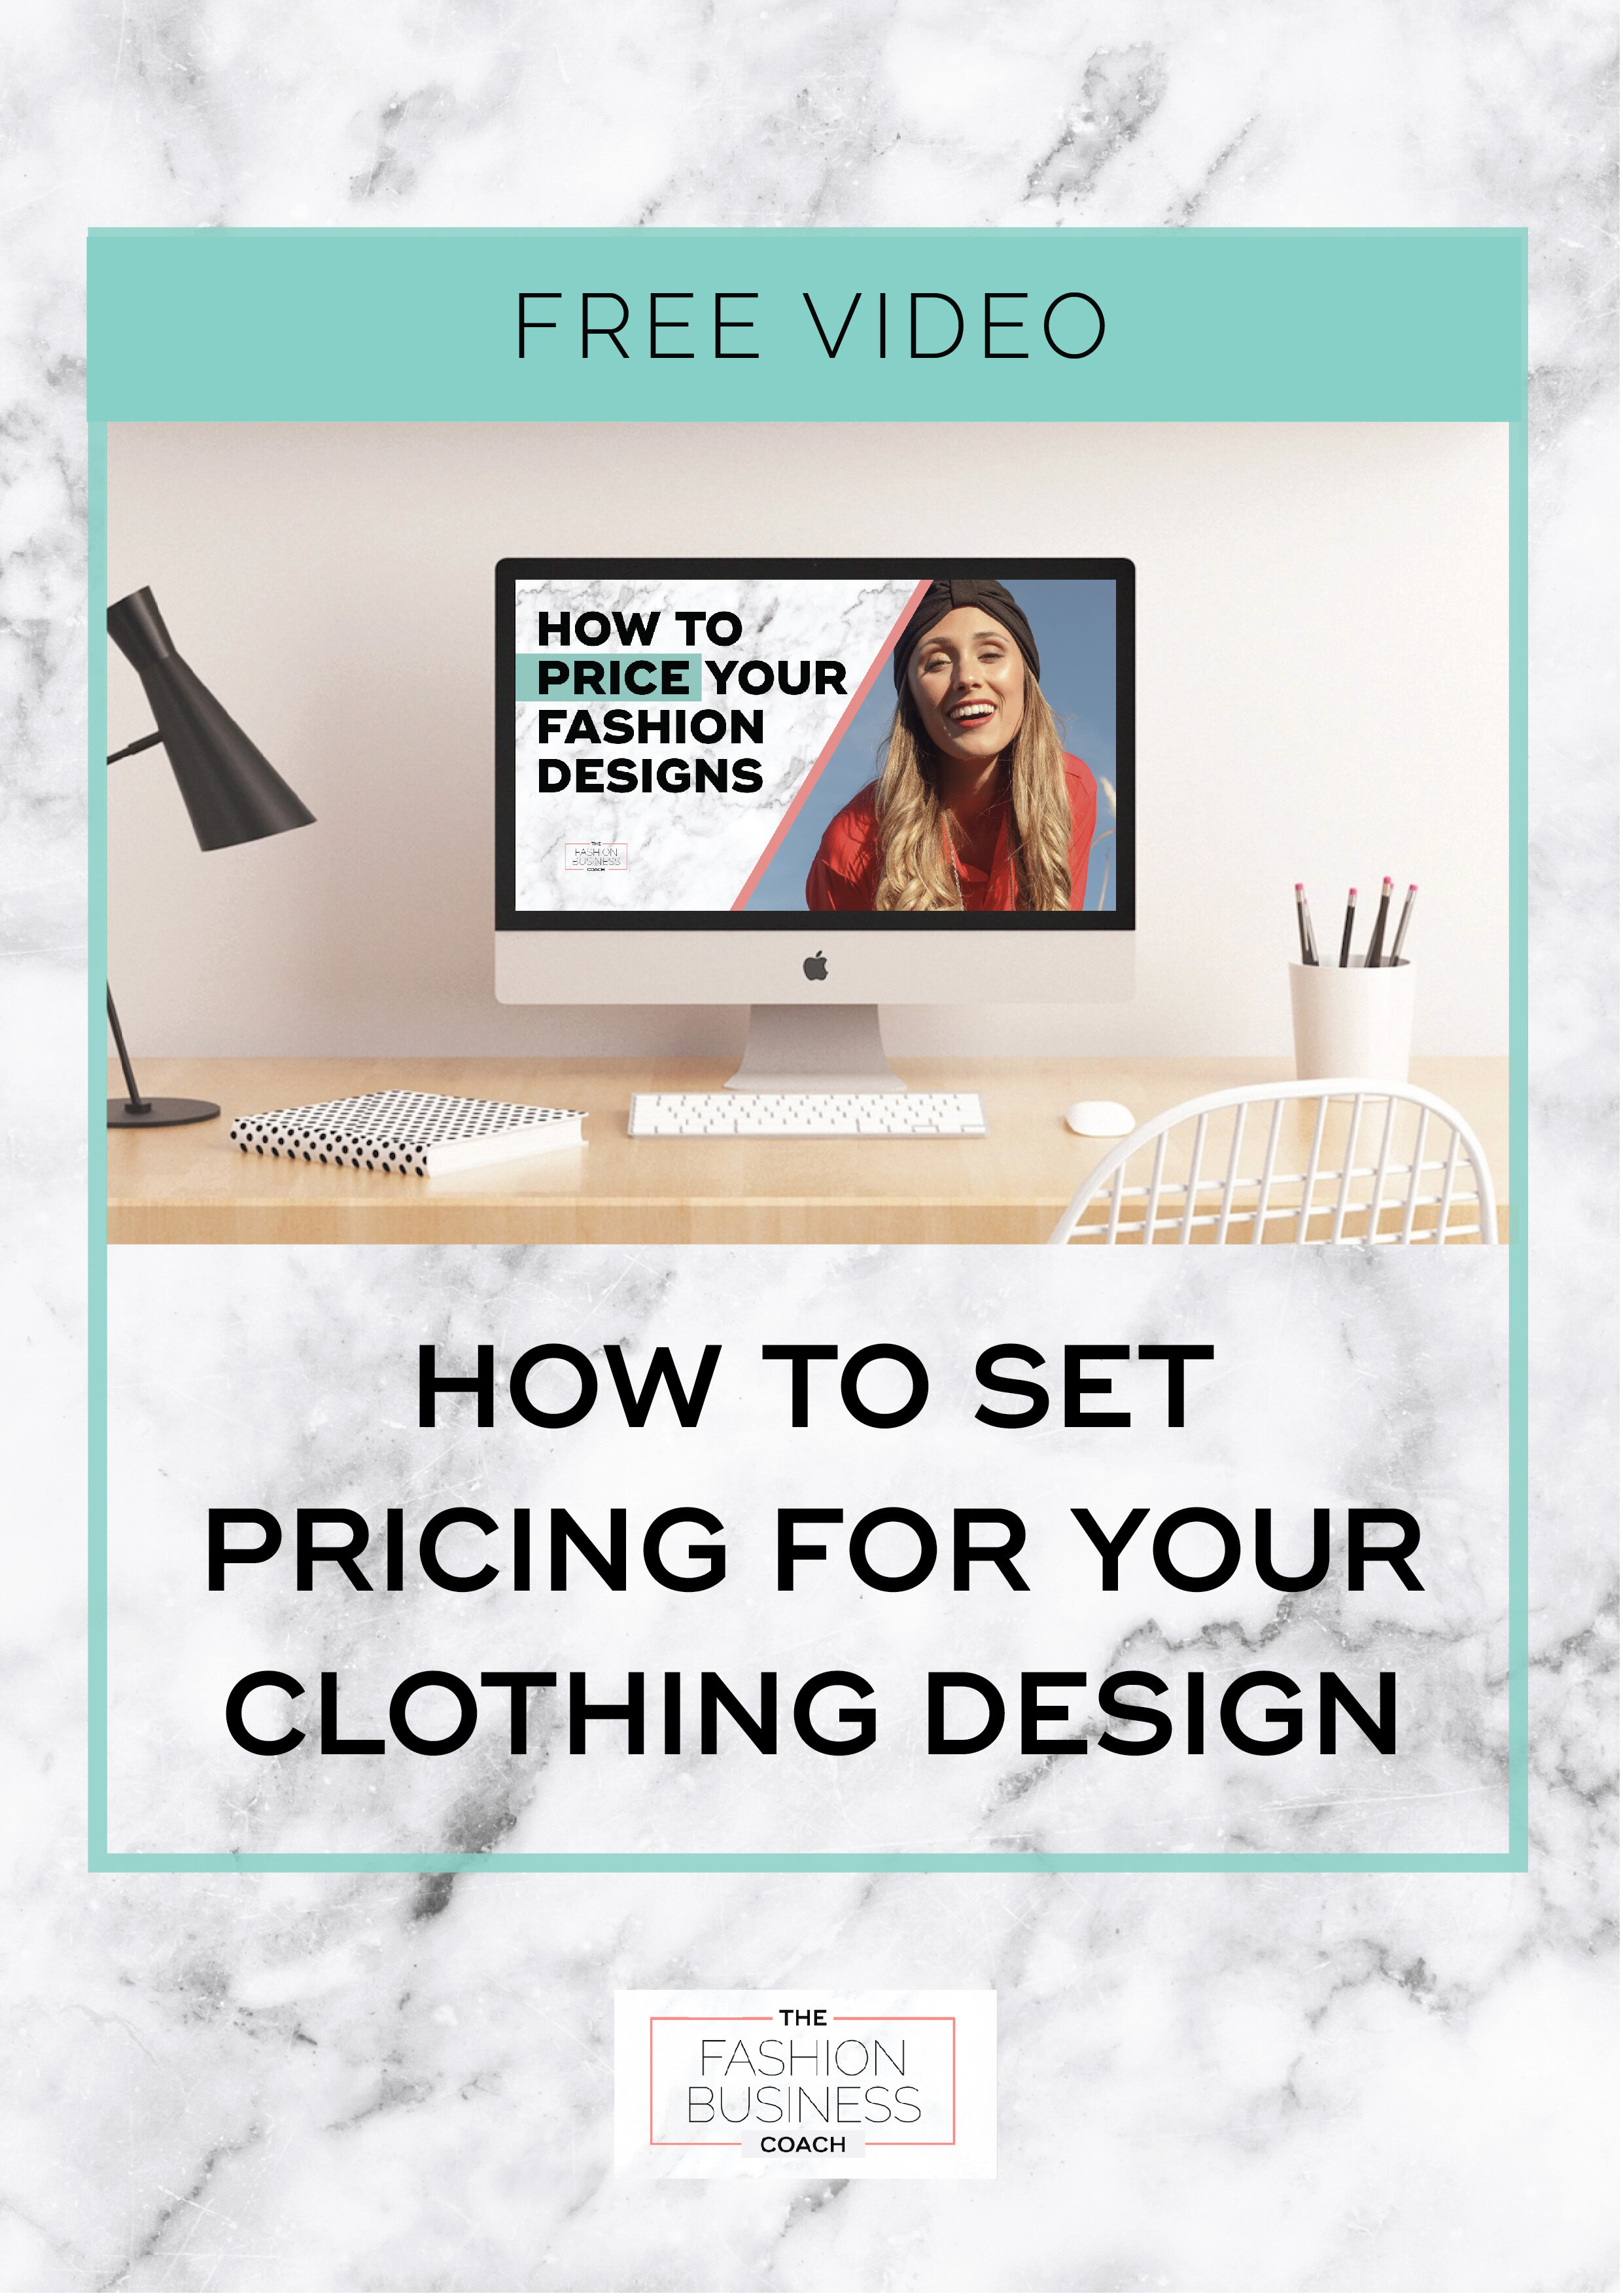 How to Set Pricing for Your Clothing Design1.jpg